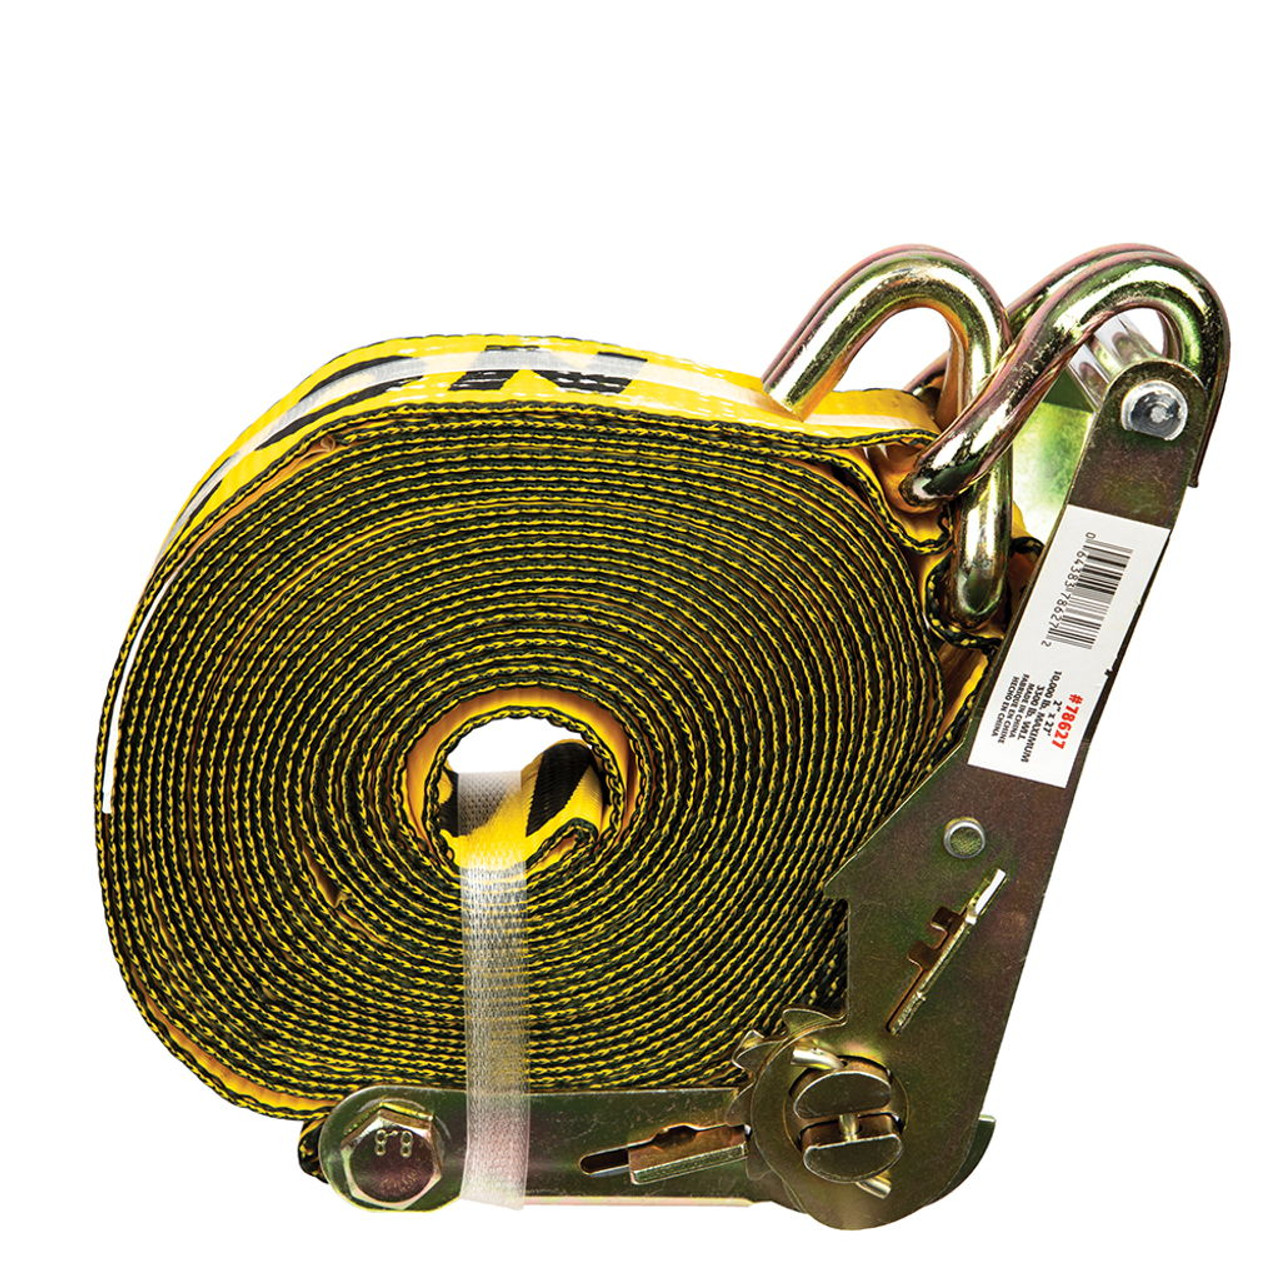 2T 4M Ratchet Strap with Claw Hook - Versatile for Machinery, Cars, Timber